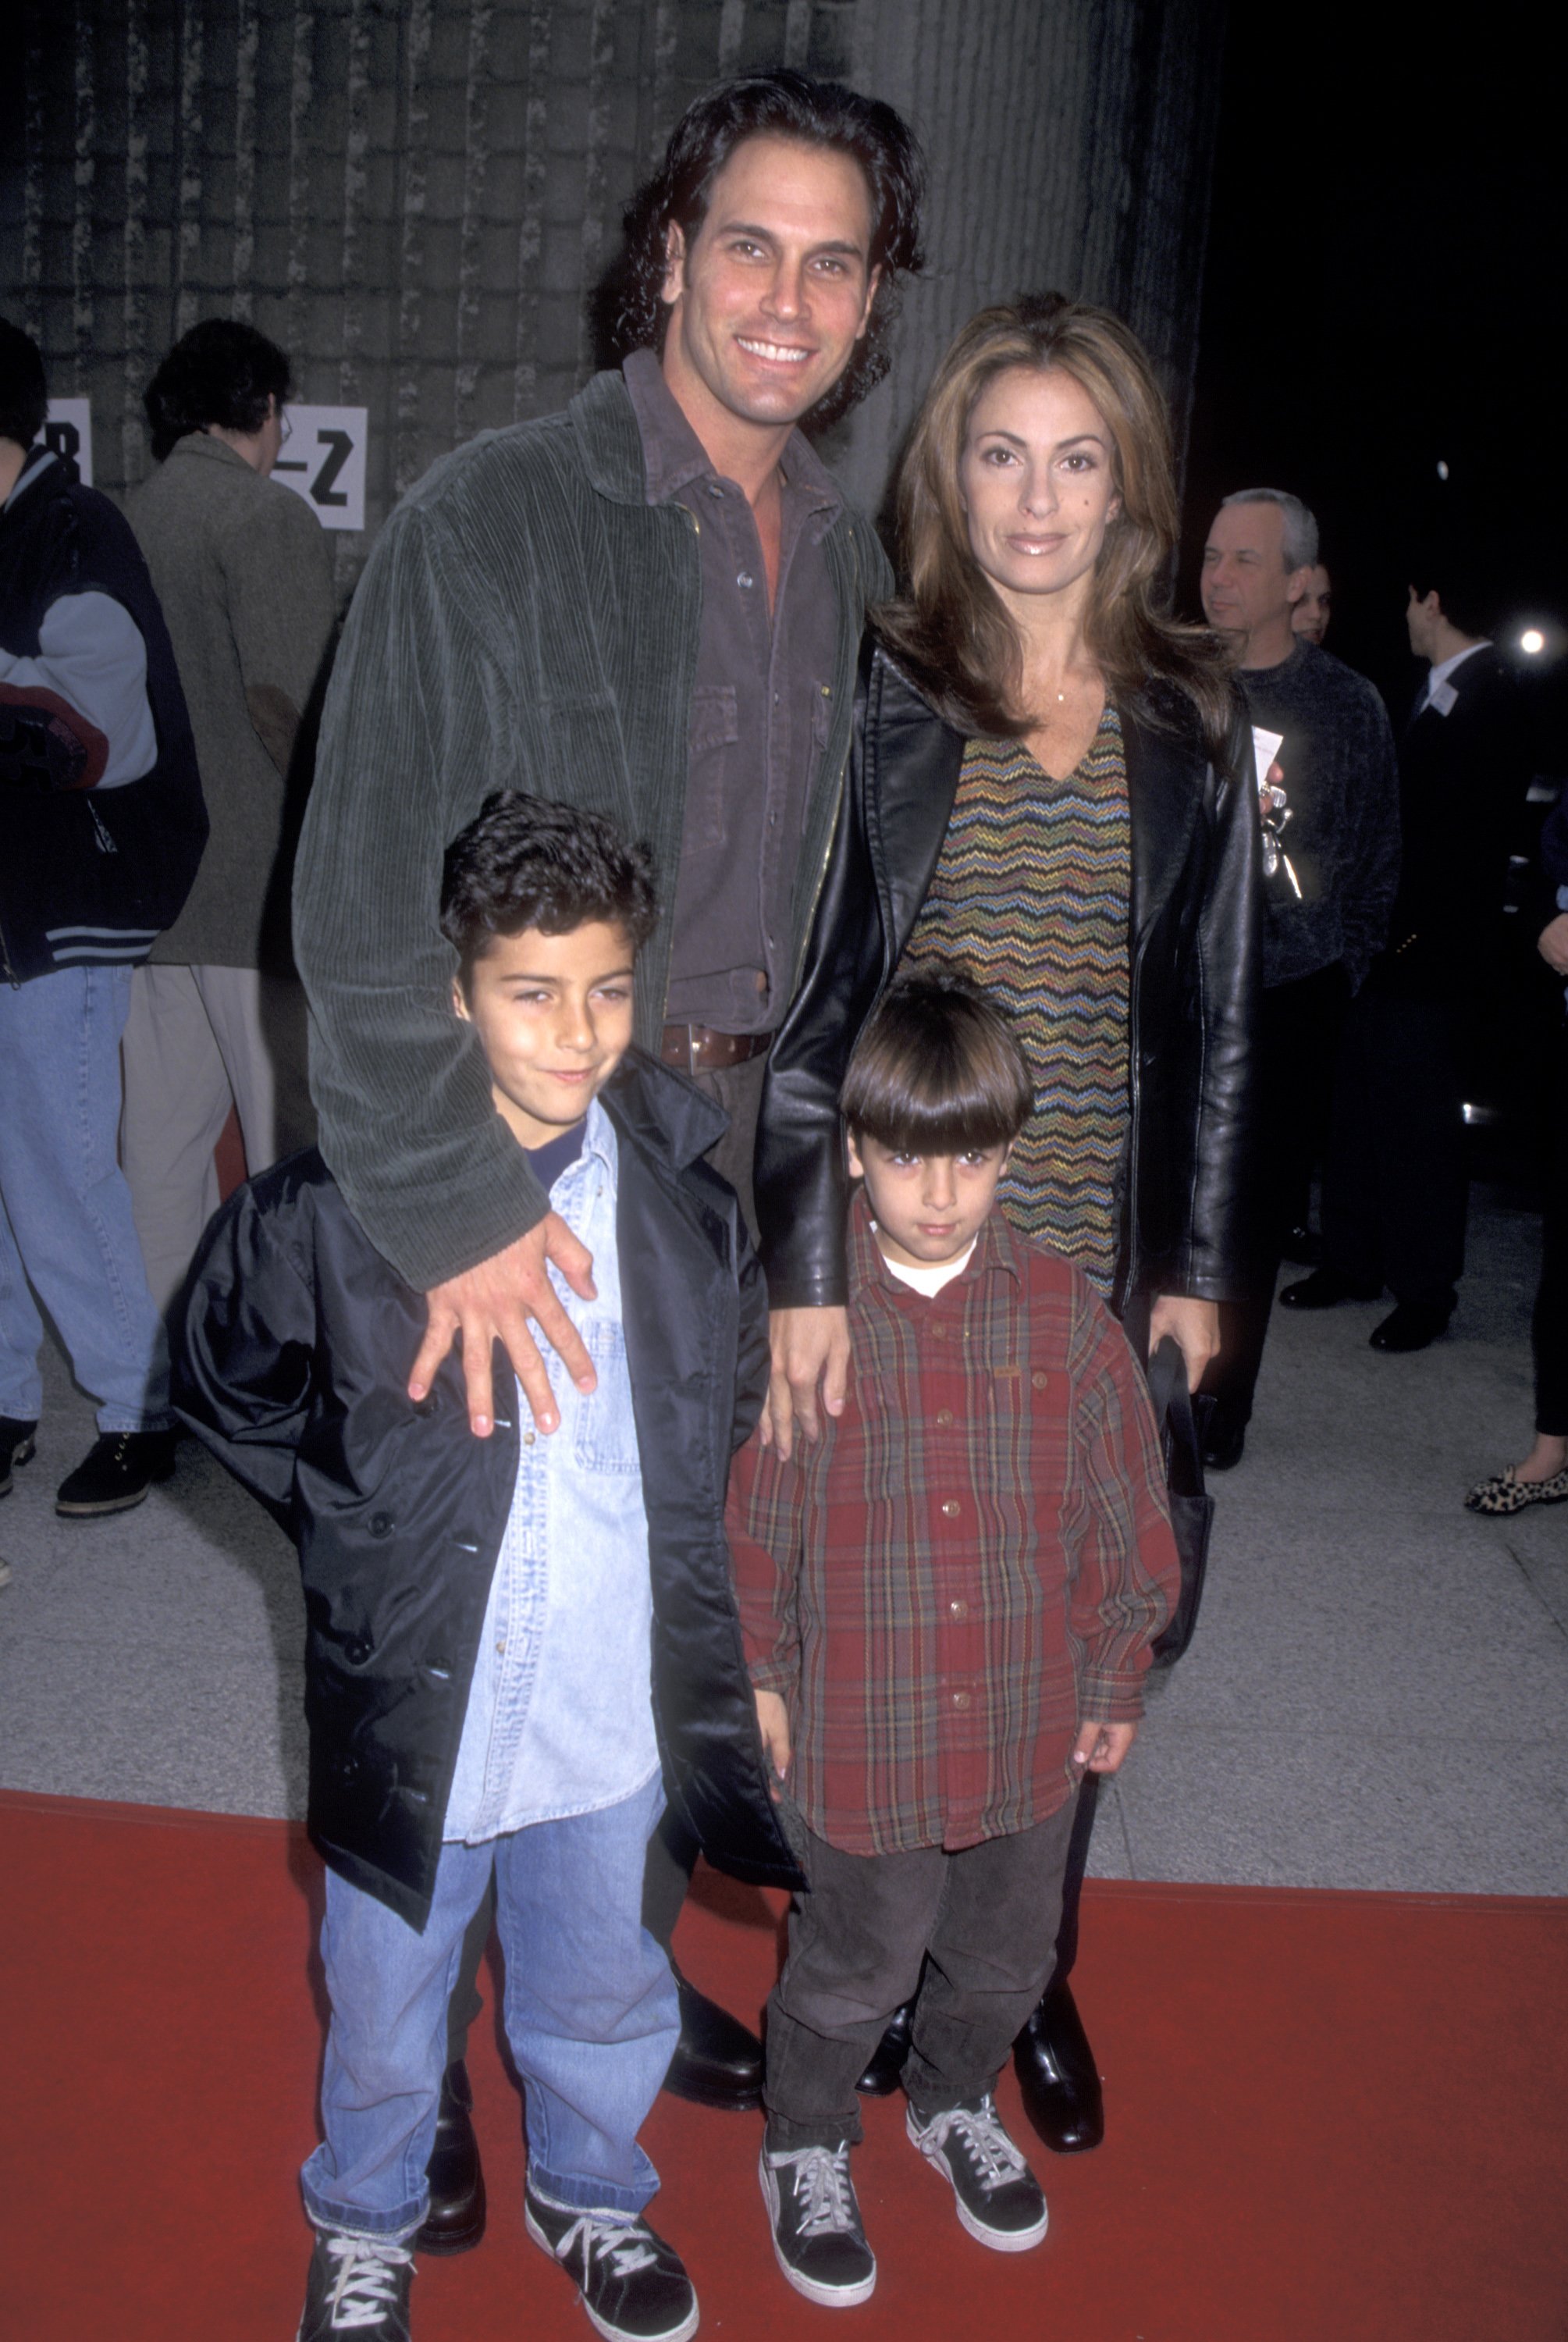 Actor Don Diamont with his wife Rachel Braun and kids attending the "Beverly Hills Ninja" Westwood Premiere at Avco Center Cinemas on January 11, 1997 in Westwood, California | Source: Getty Images